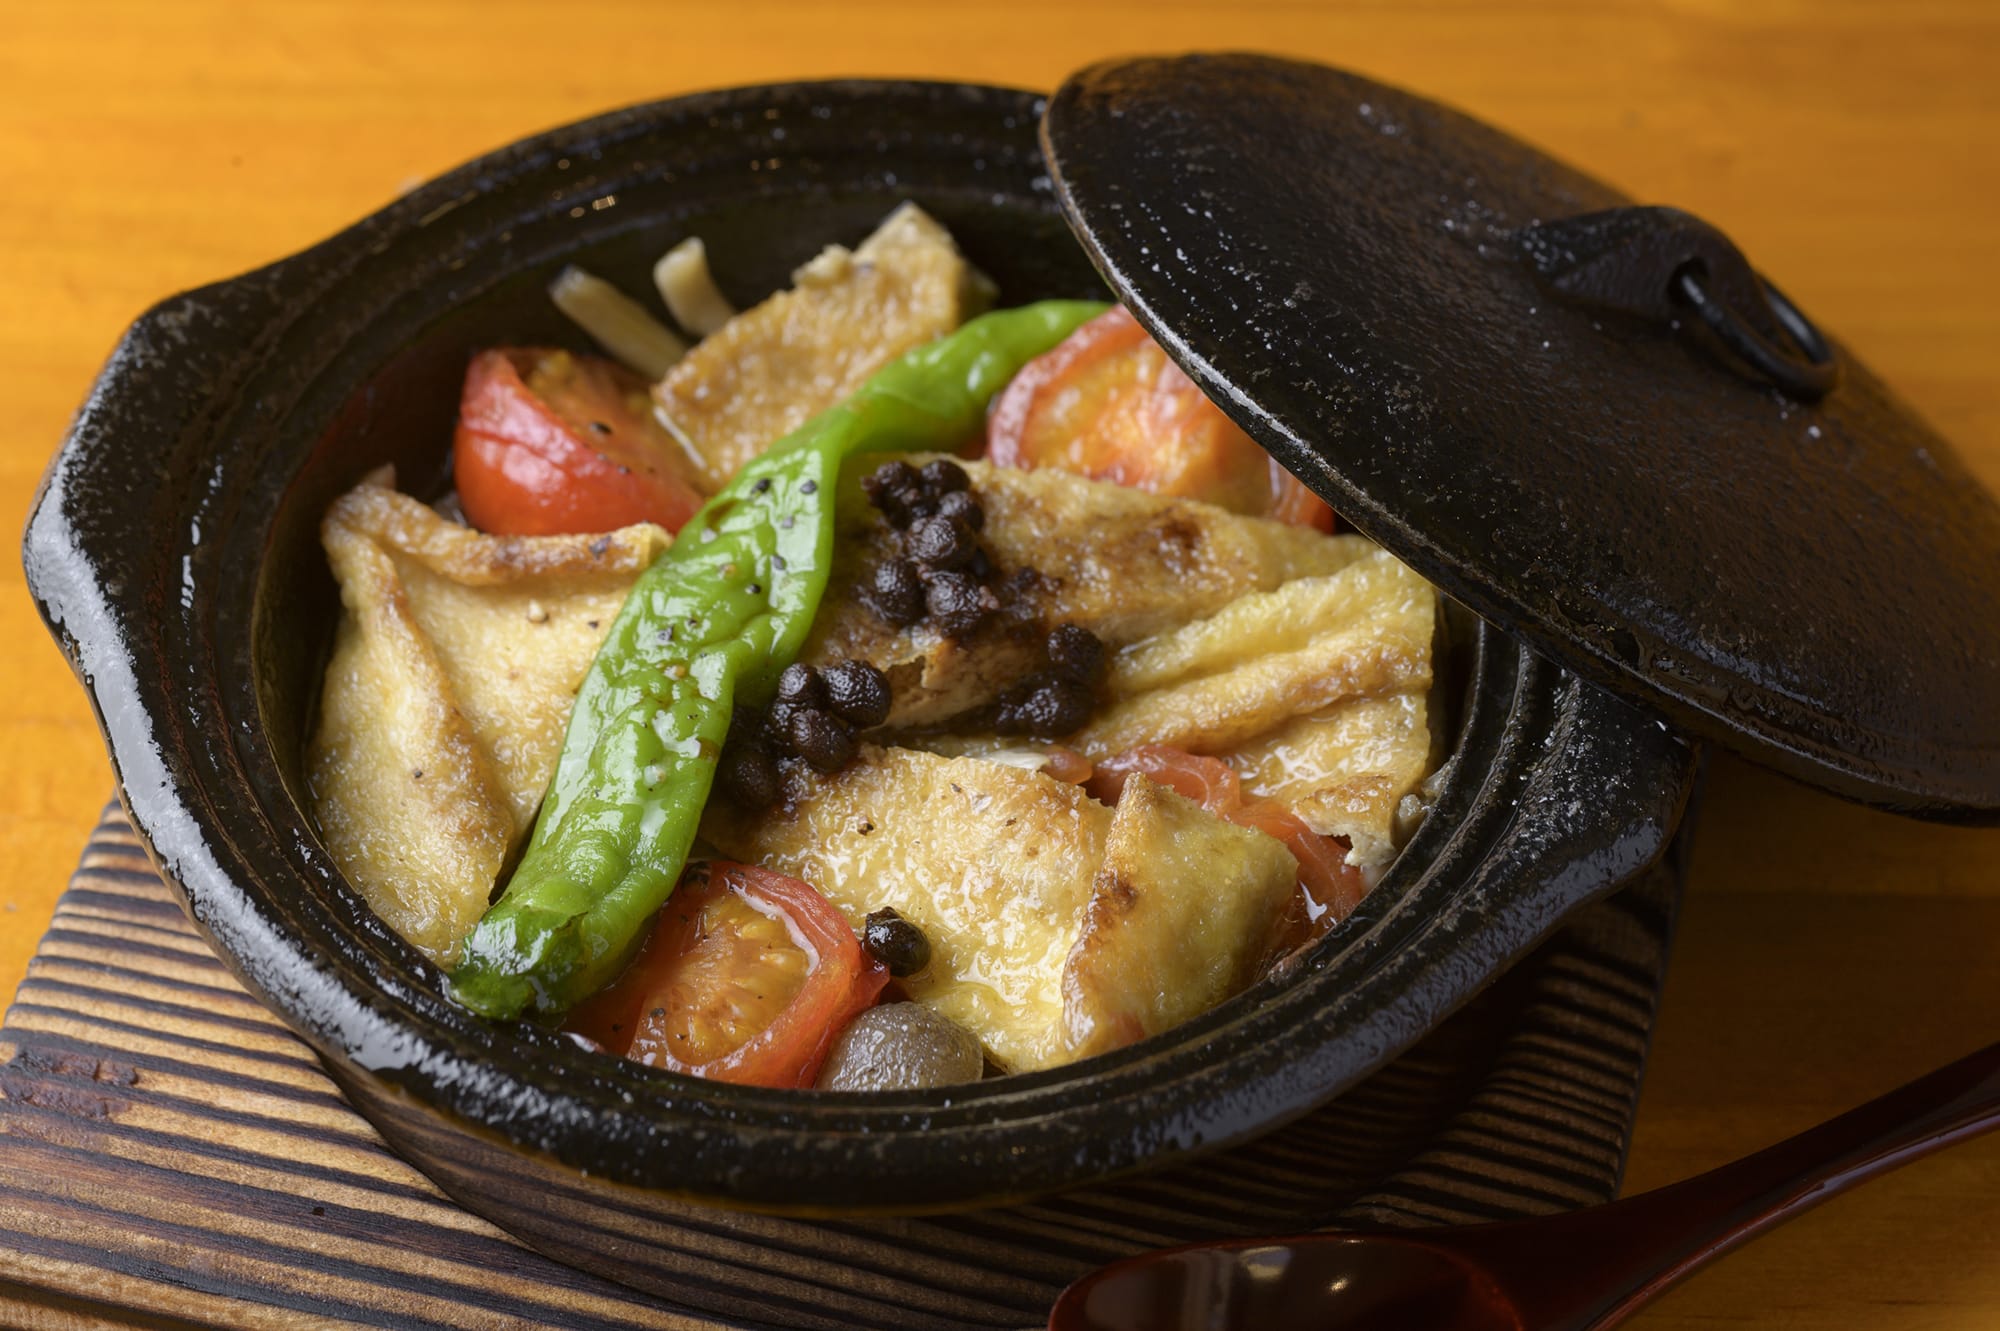 The vegetarian course features the Arima-sansho-yaki (grilled Arima sansho peppers) with abura-age (deep fried tofu) and mushrooms instead of the fish and vegetable dish.